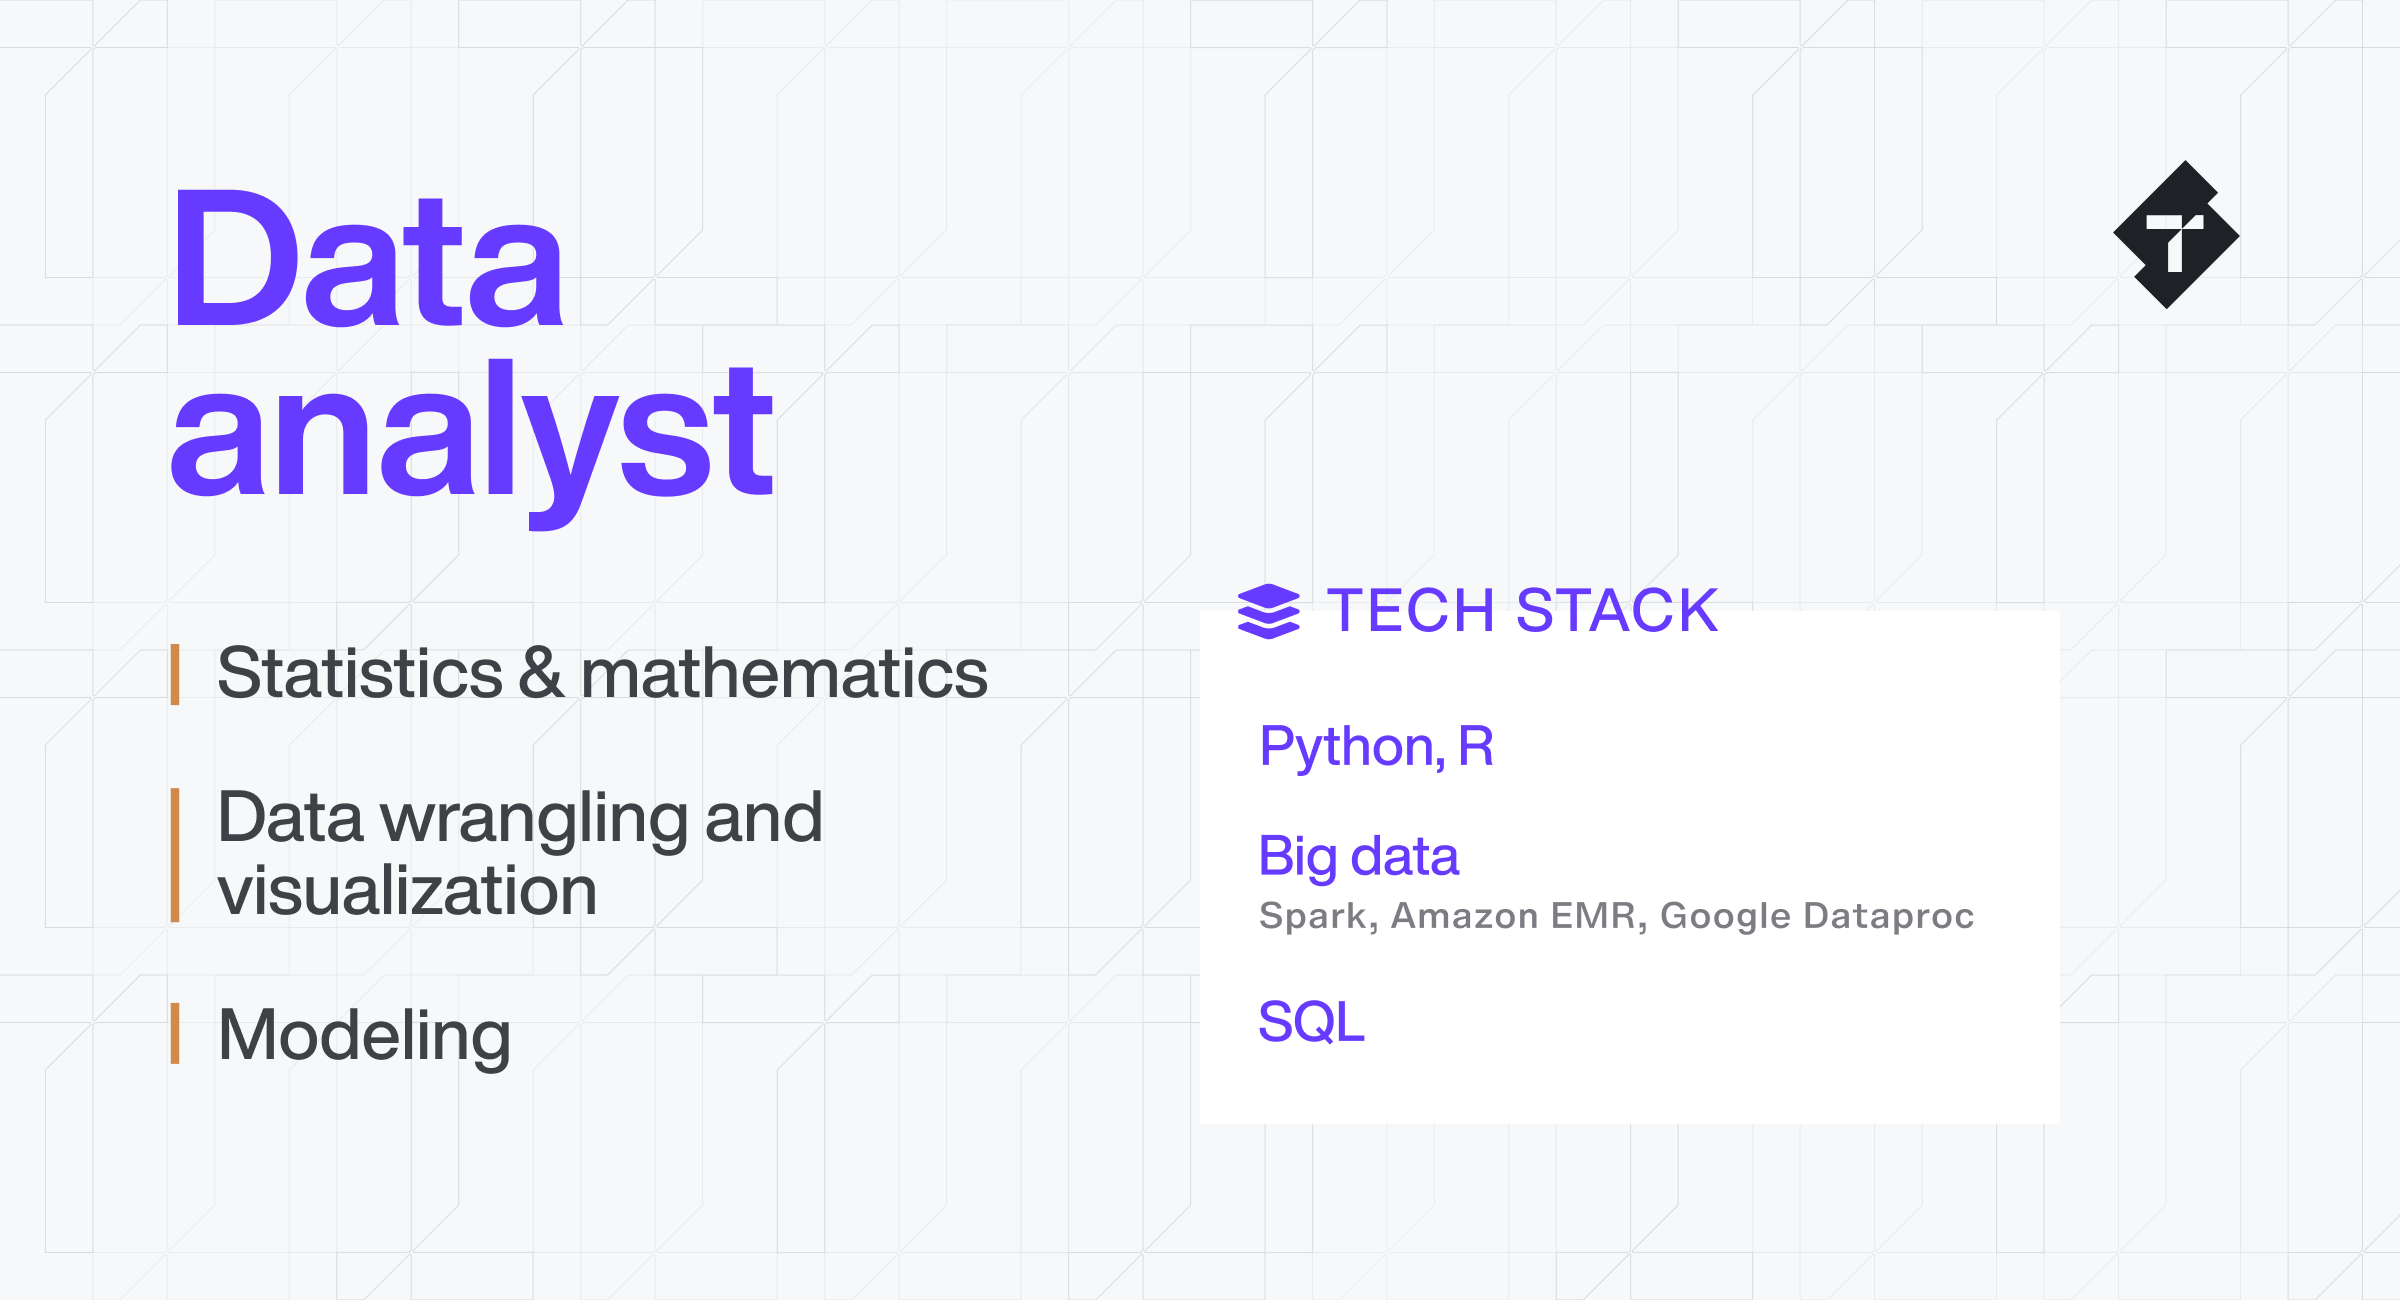 Data analyst skills and tech stack